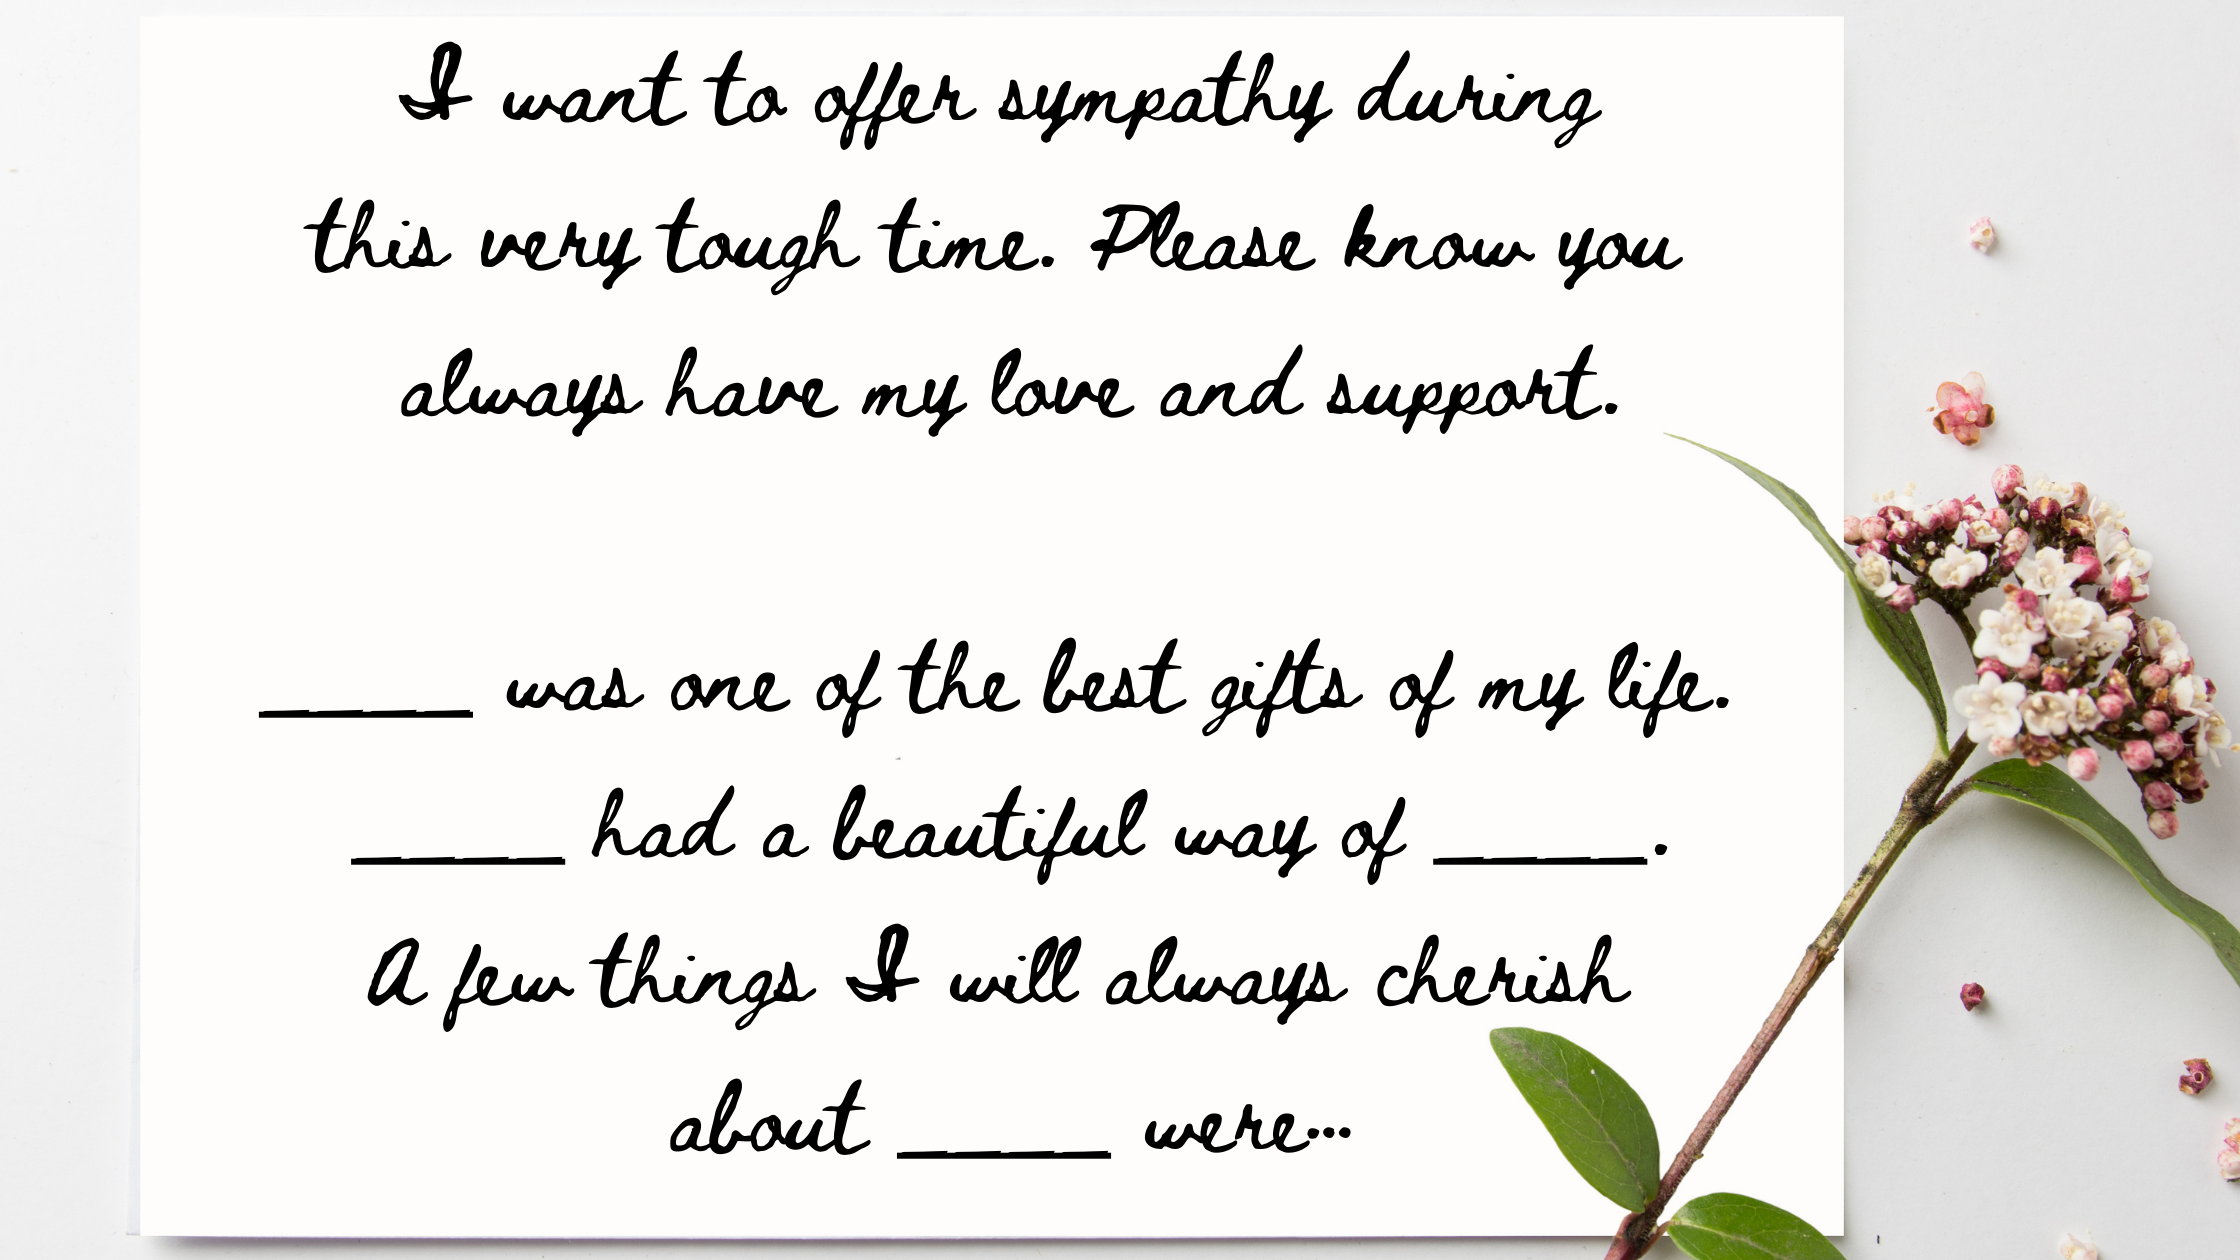 Offer your sympathy to someone with a hand-written message.